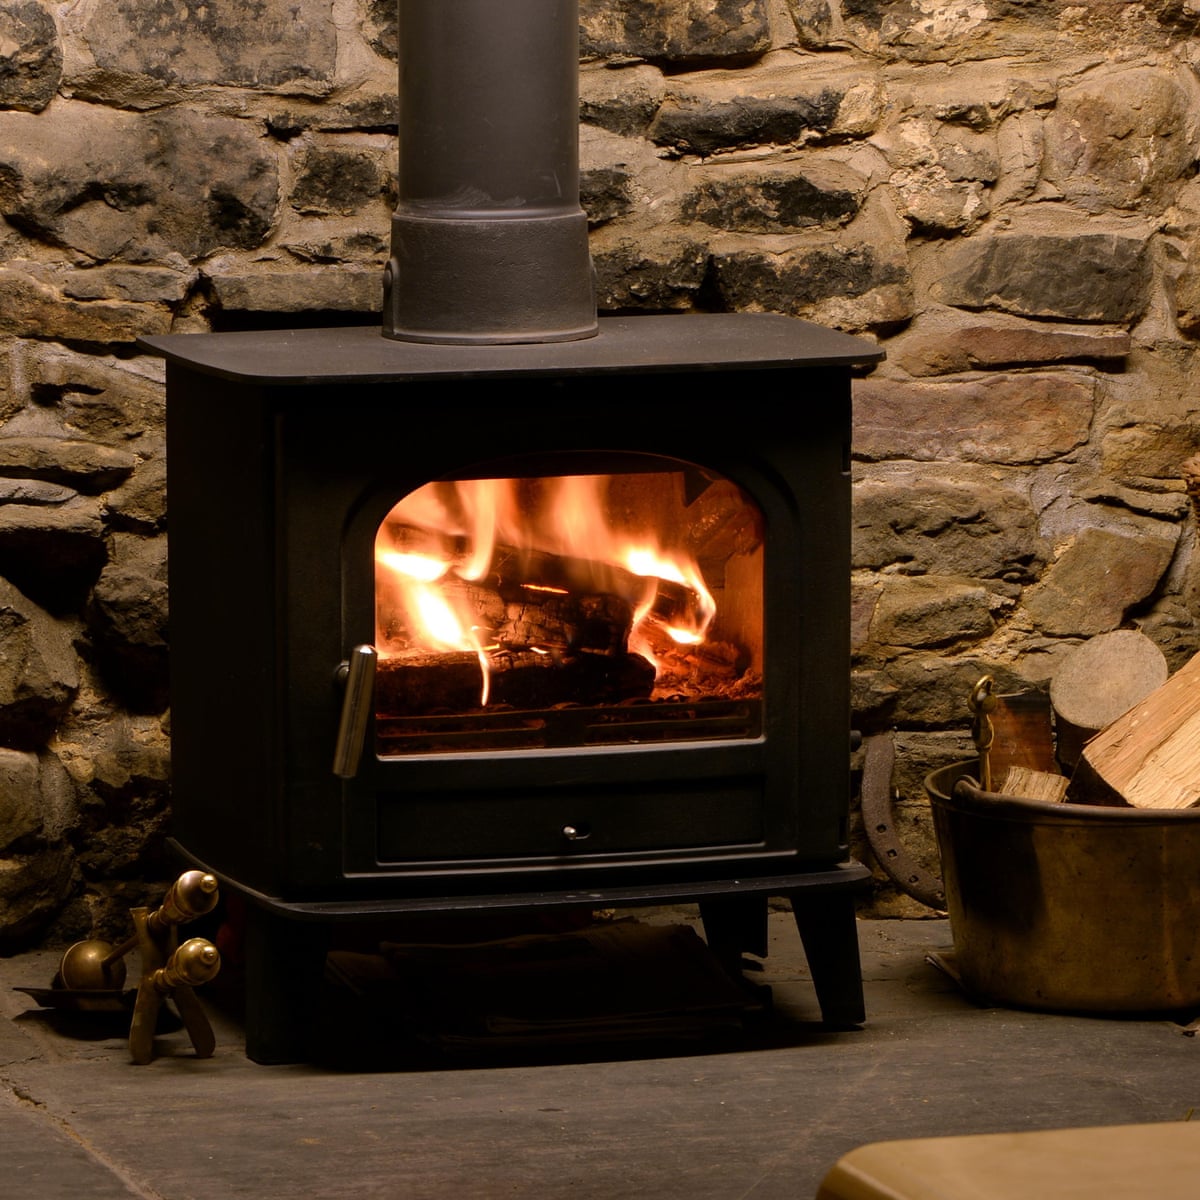 Can You Get A Wood Stove Installed Without A Chimney?